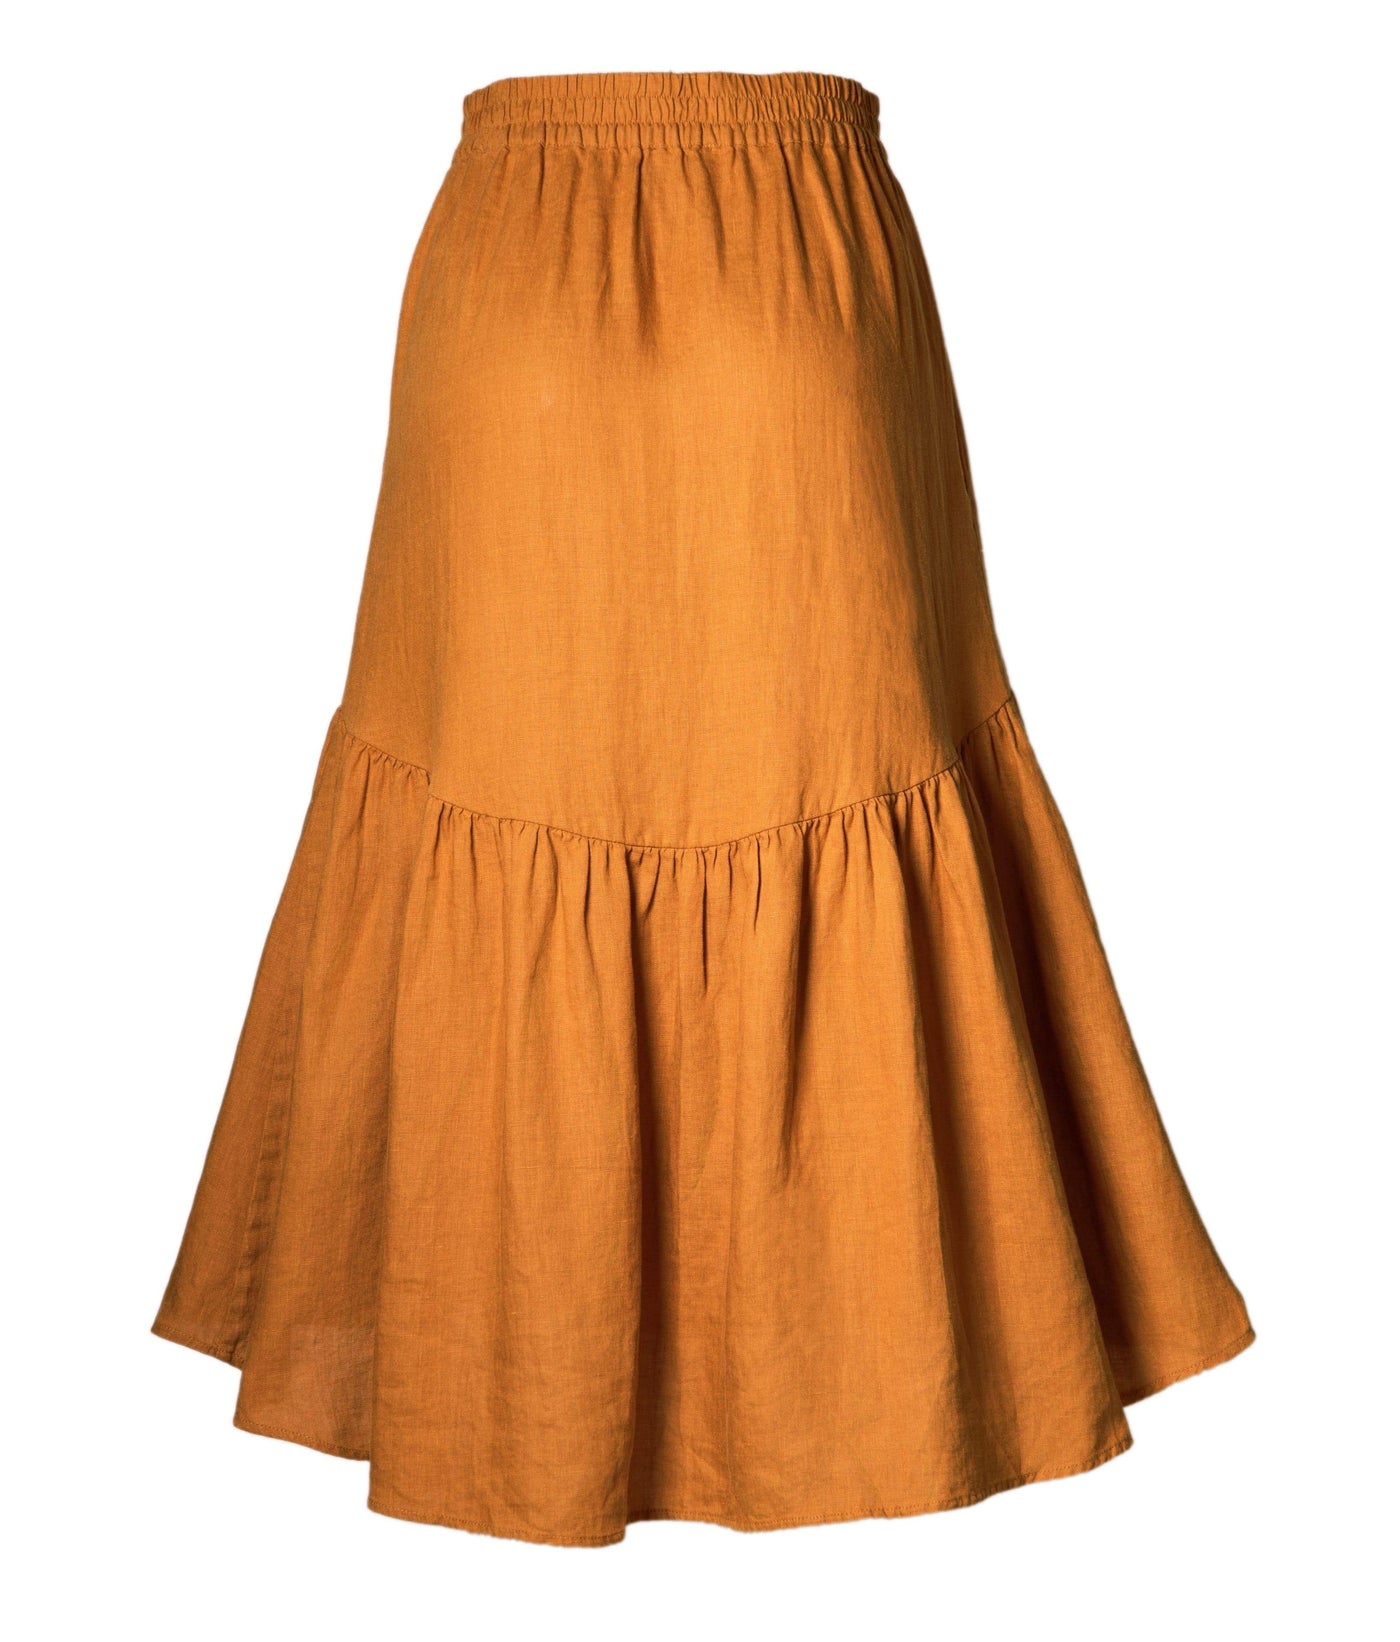 Lilly Pilly Collection 100% organic linen Lola Skirt in Cinnamon as 3D model back view